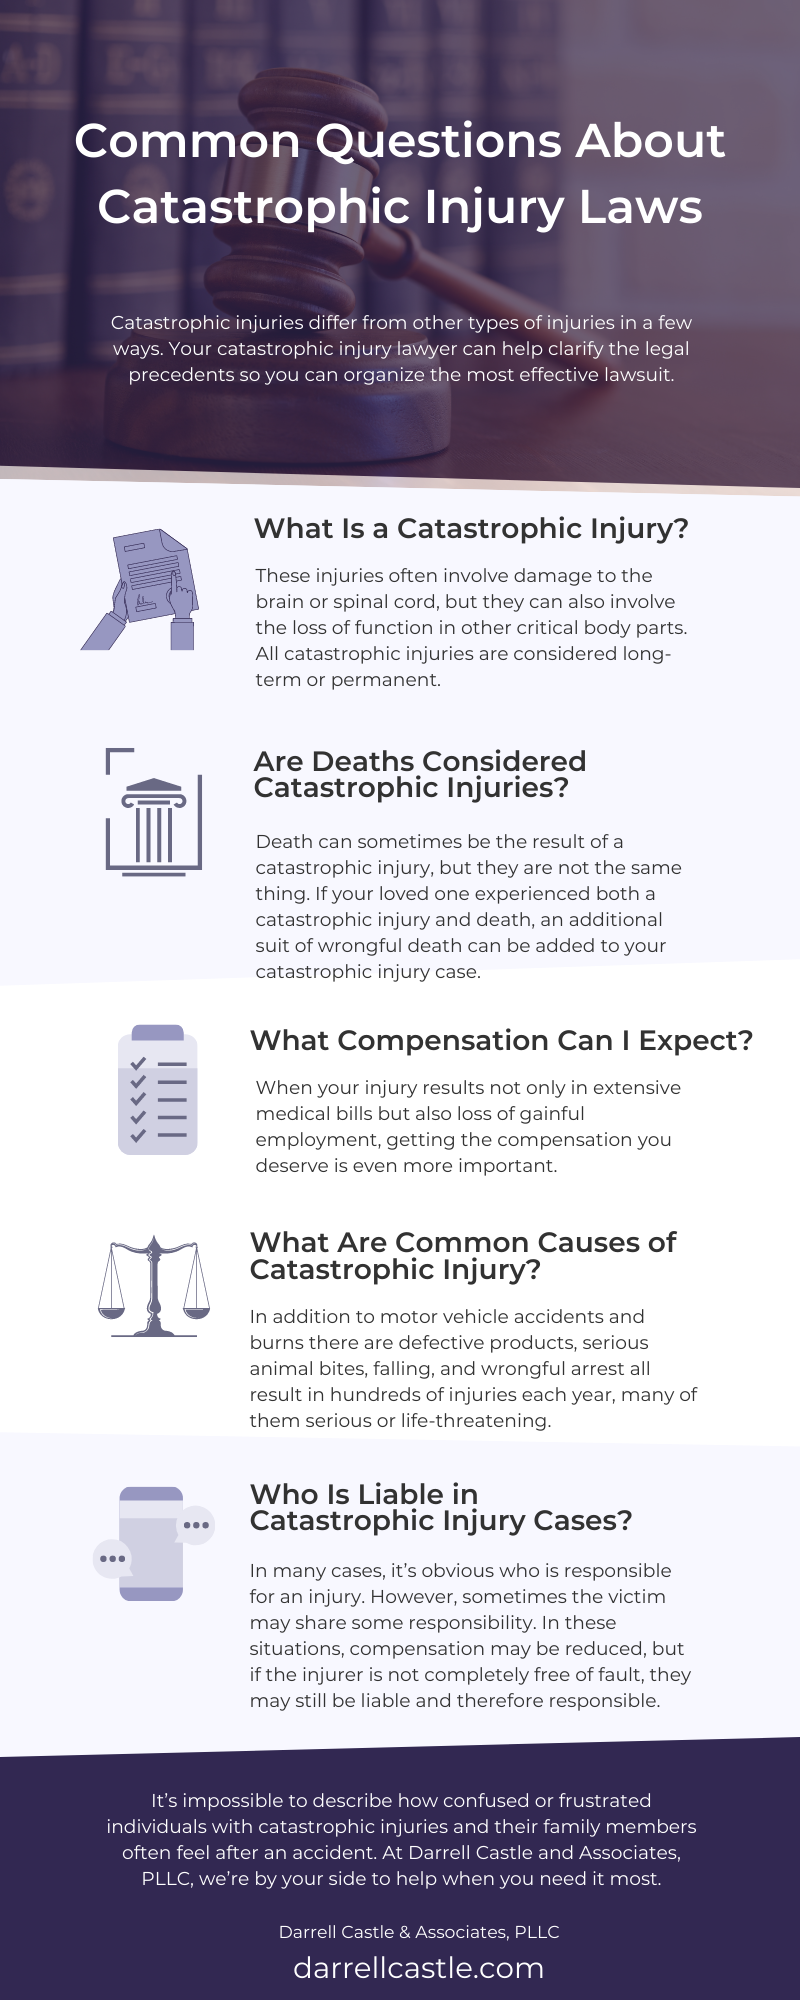 Common Questions about Catastrophic Injury Laws Infographic